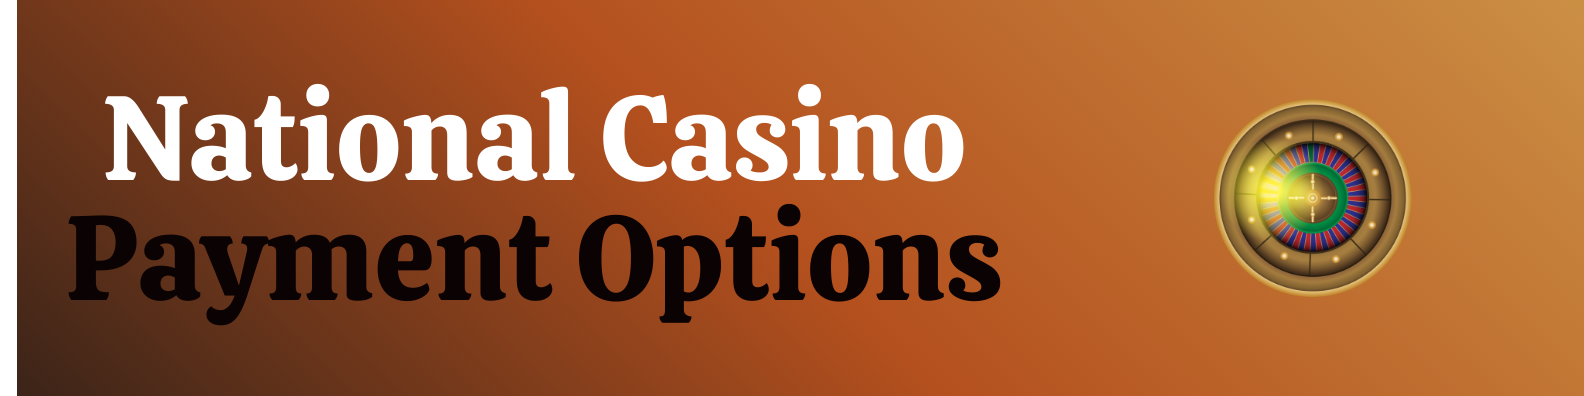 National Casino Payment Options